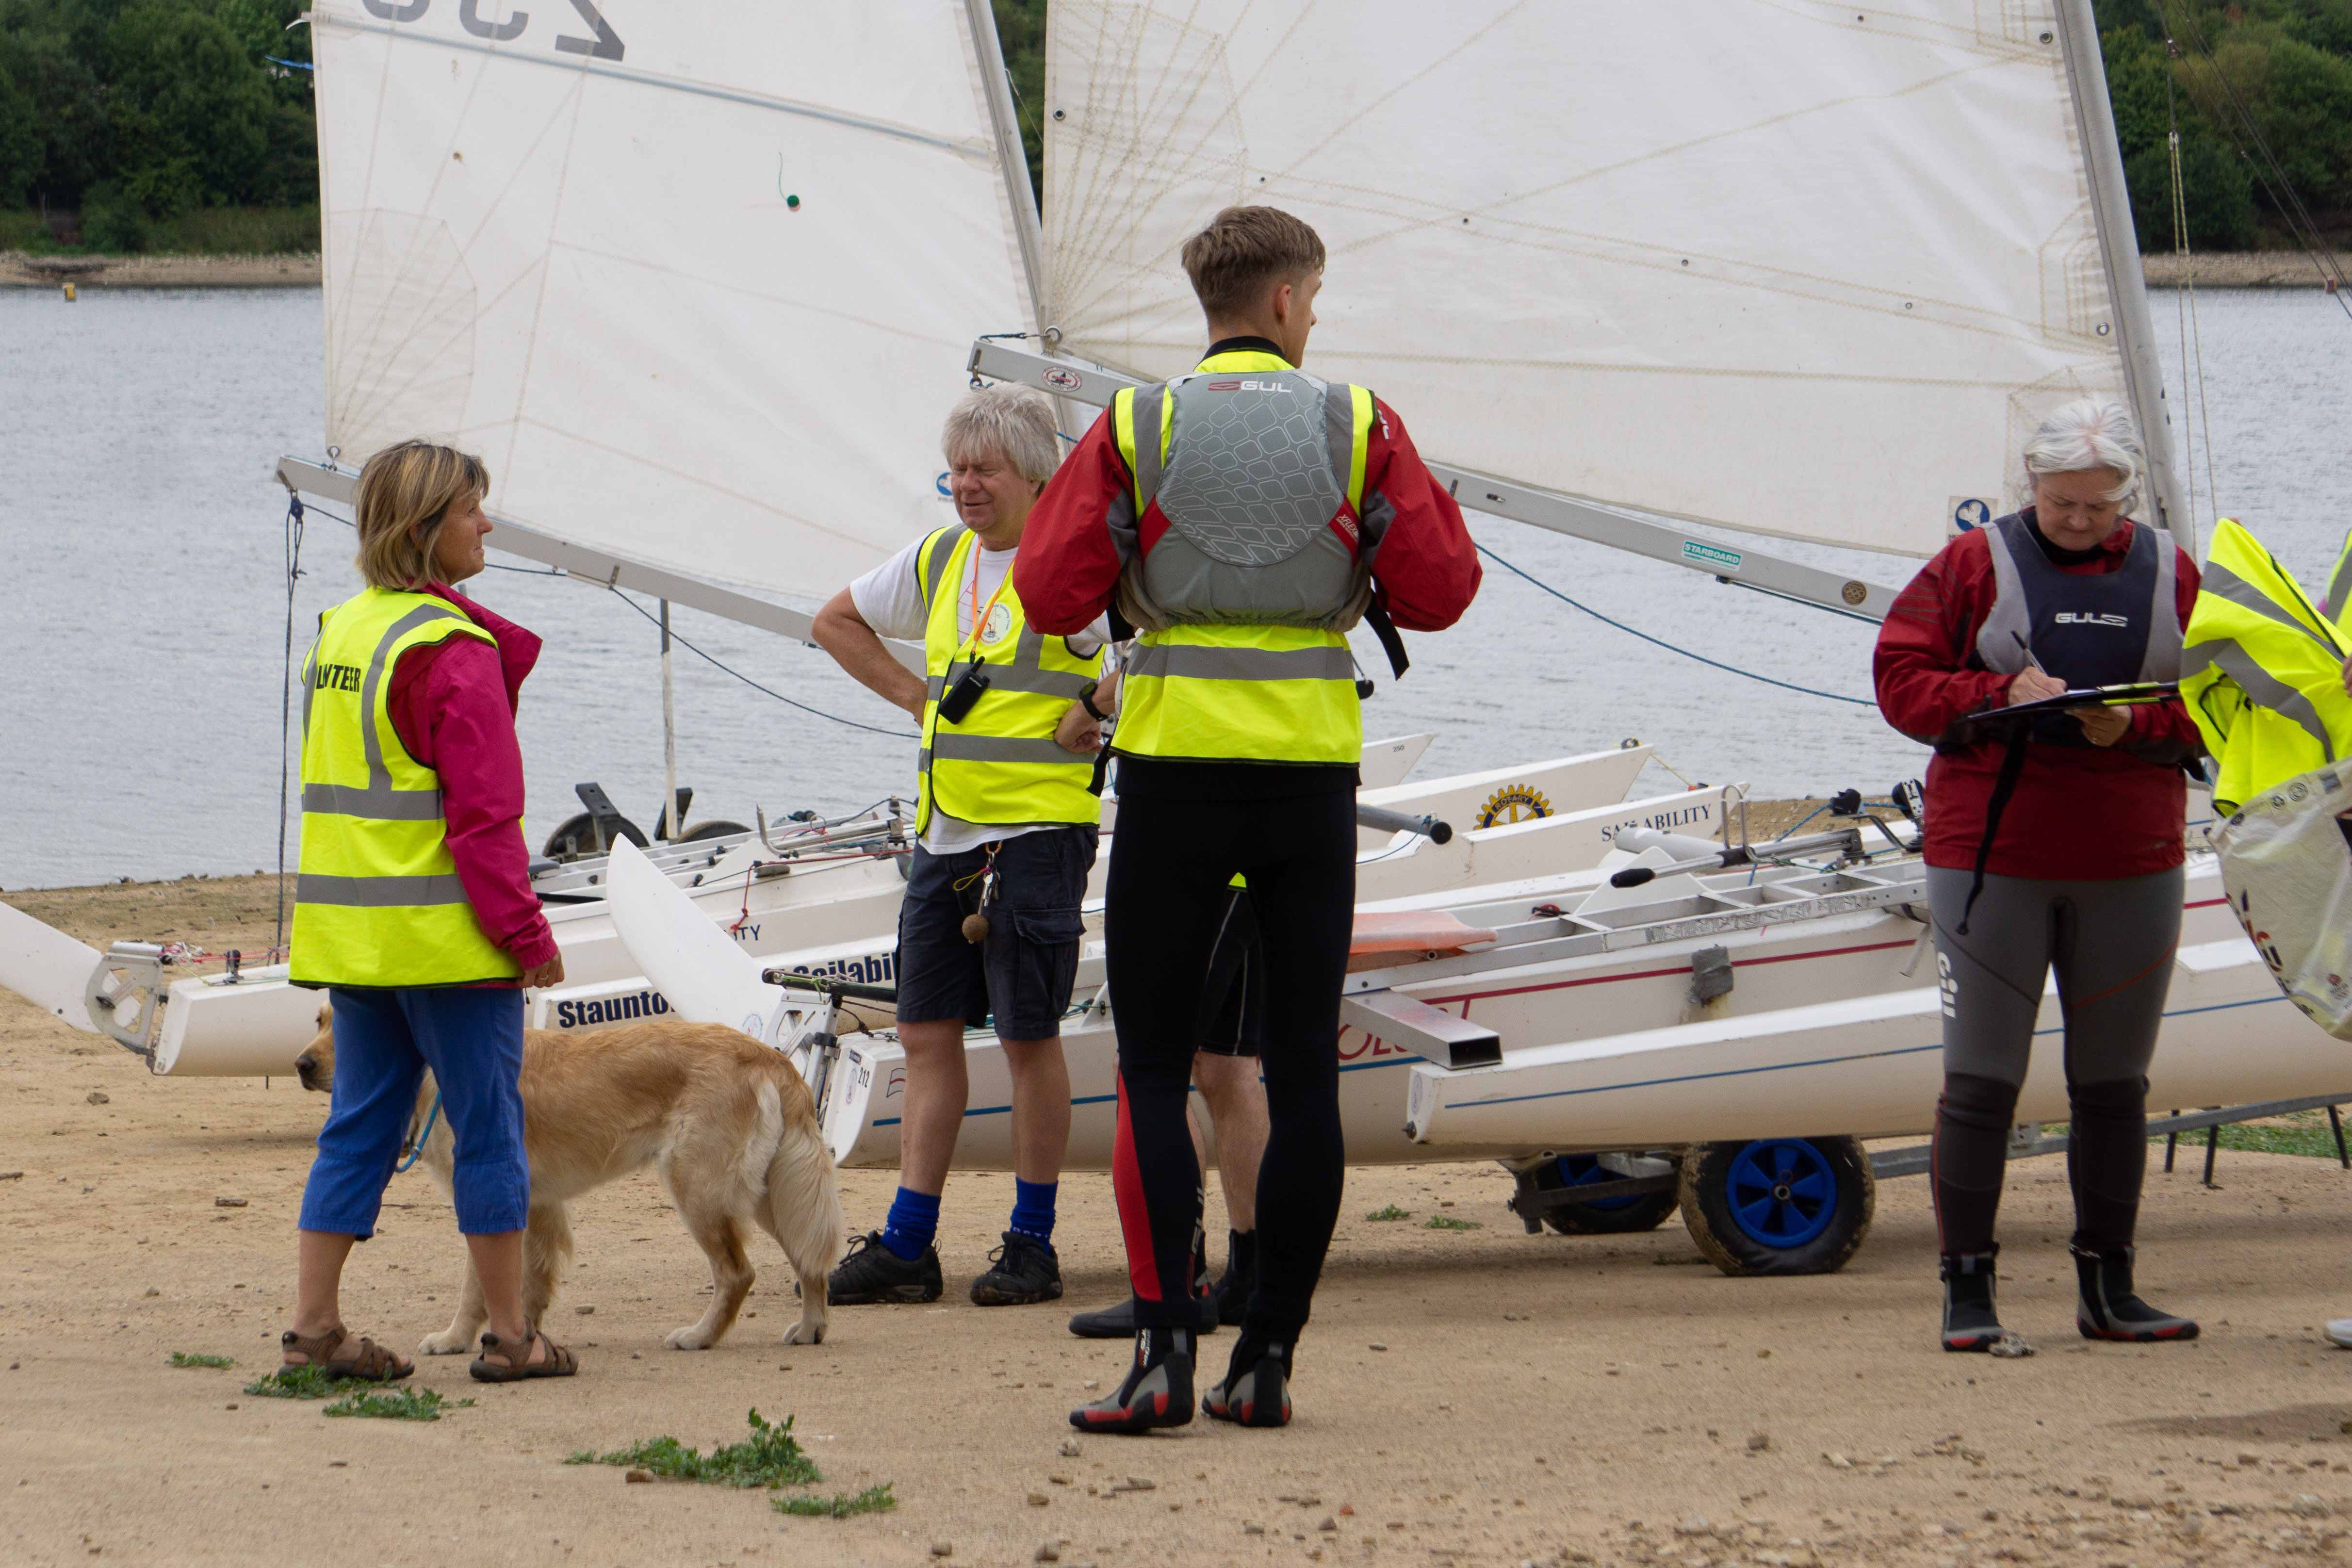 Sailability Session - Saturday 30th July 2022